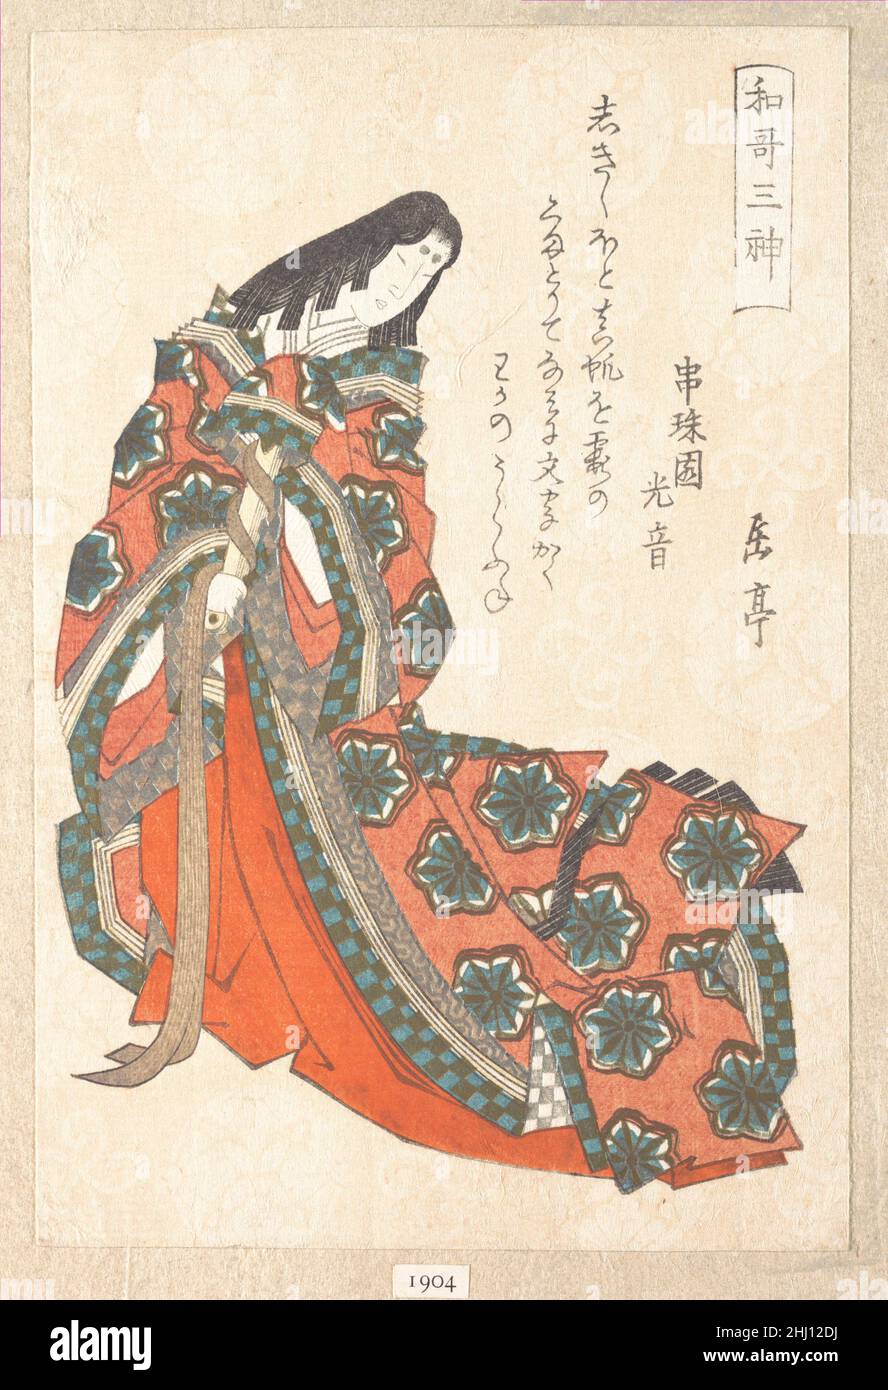 Sotoori-hime (early 5th century), One of the Three Gods of PoetryFrom the Spring Rain Collection (Harusame shū), vol. 1 ca. 1820s Yashima Gakutei Japanese Surimono are privately published woodblock prints, usually commissioned by individual poets or poetry groups as a form of New Year’s greeting card. The poems, most commonly kyōka (witty thirty-one-syllable verse), inscribed on the prints usually include felicitous imagery connected with spring, which in the lunar calendar begins on the first day of the first month. Themes of surimono are often erudite, frequently alluding to Japanese literar Stock Photo